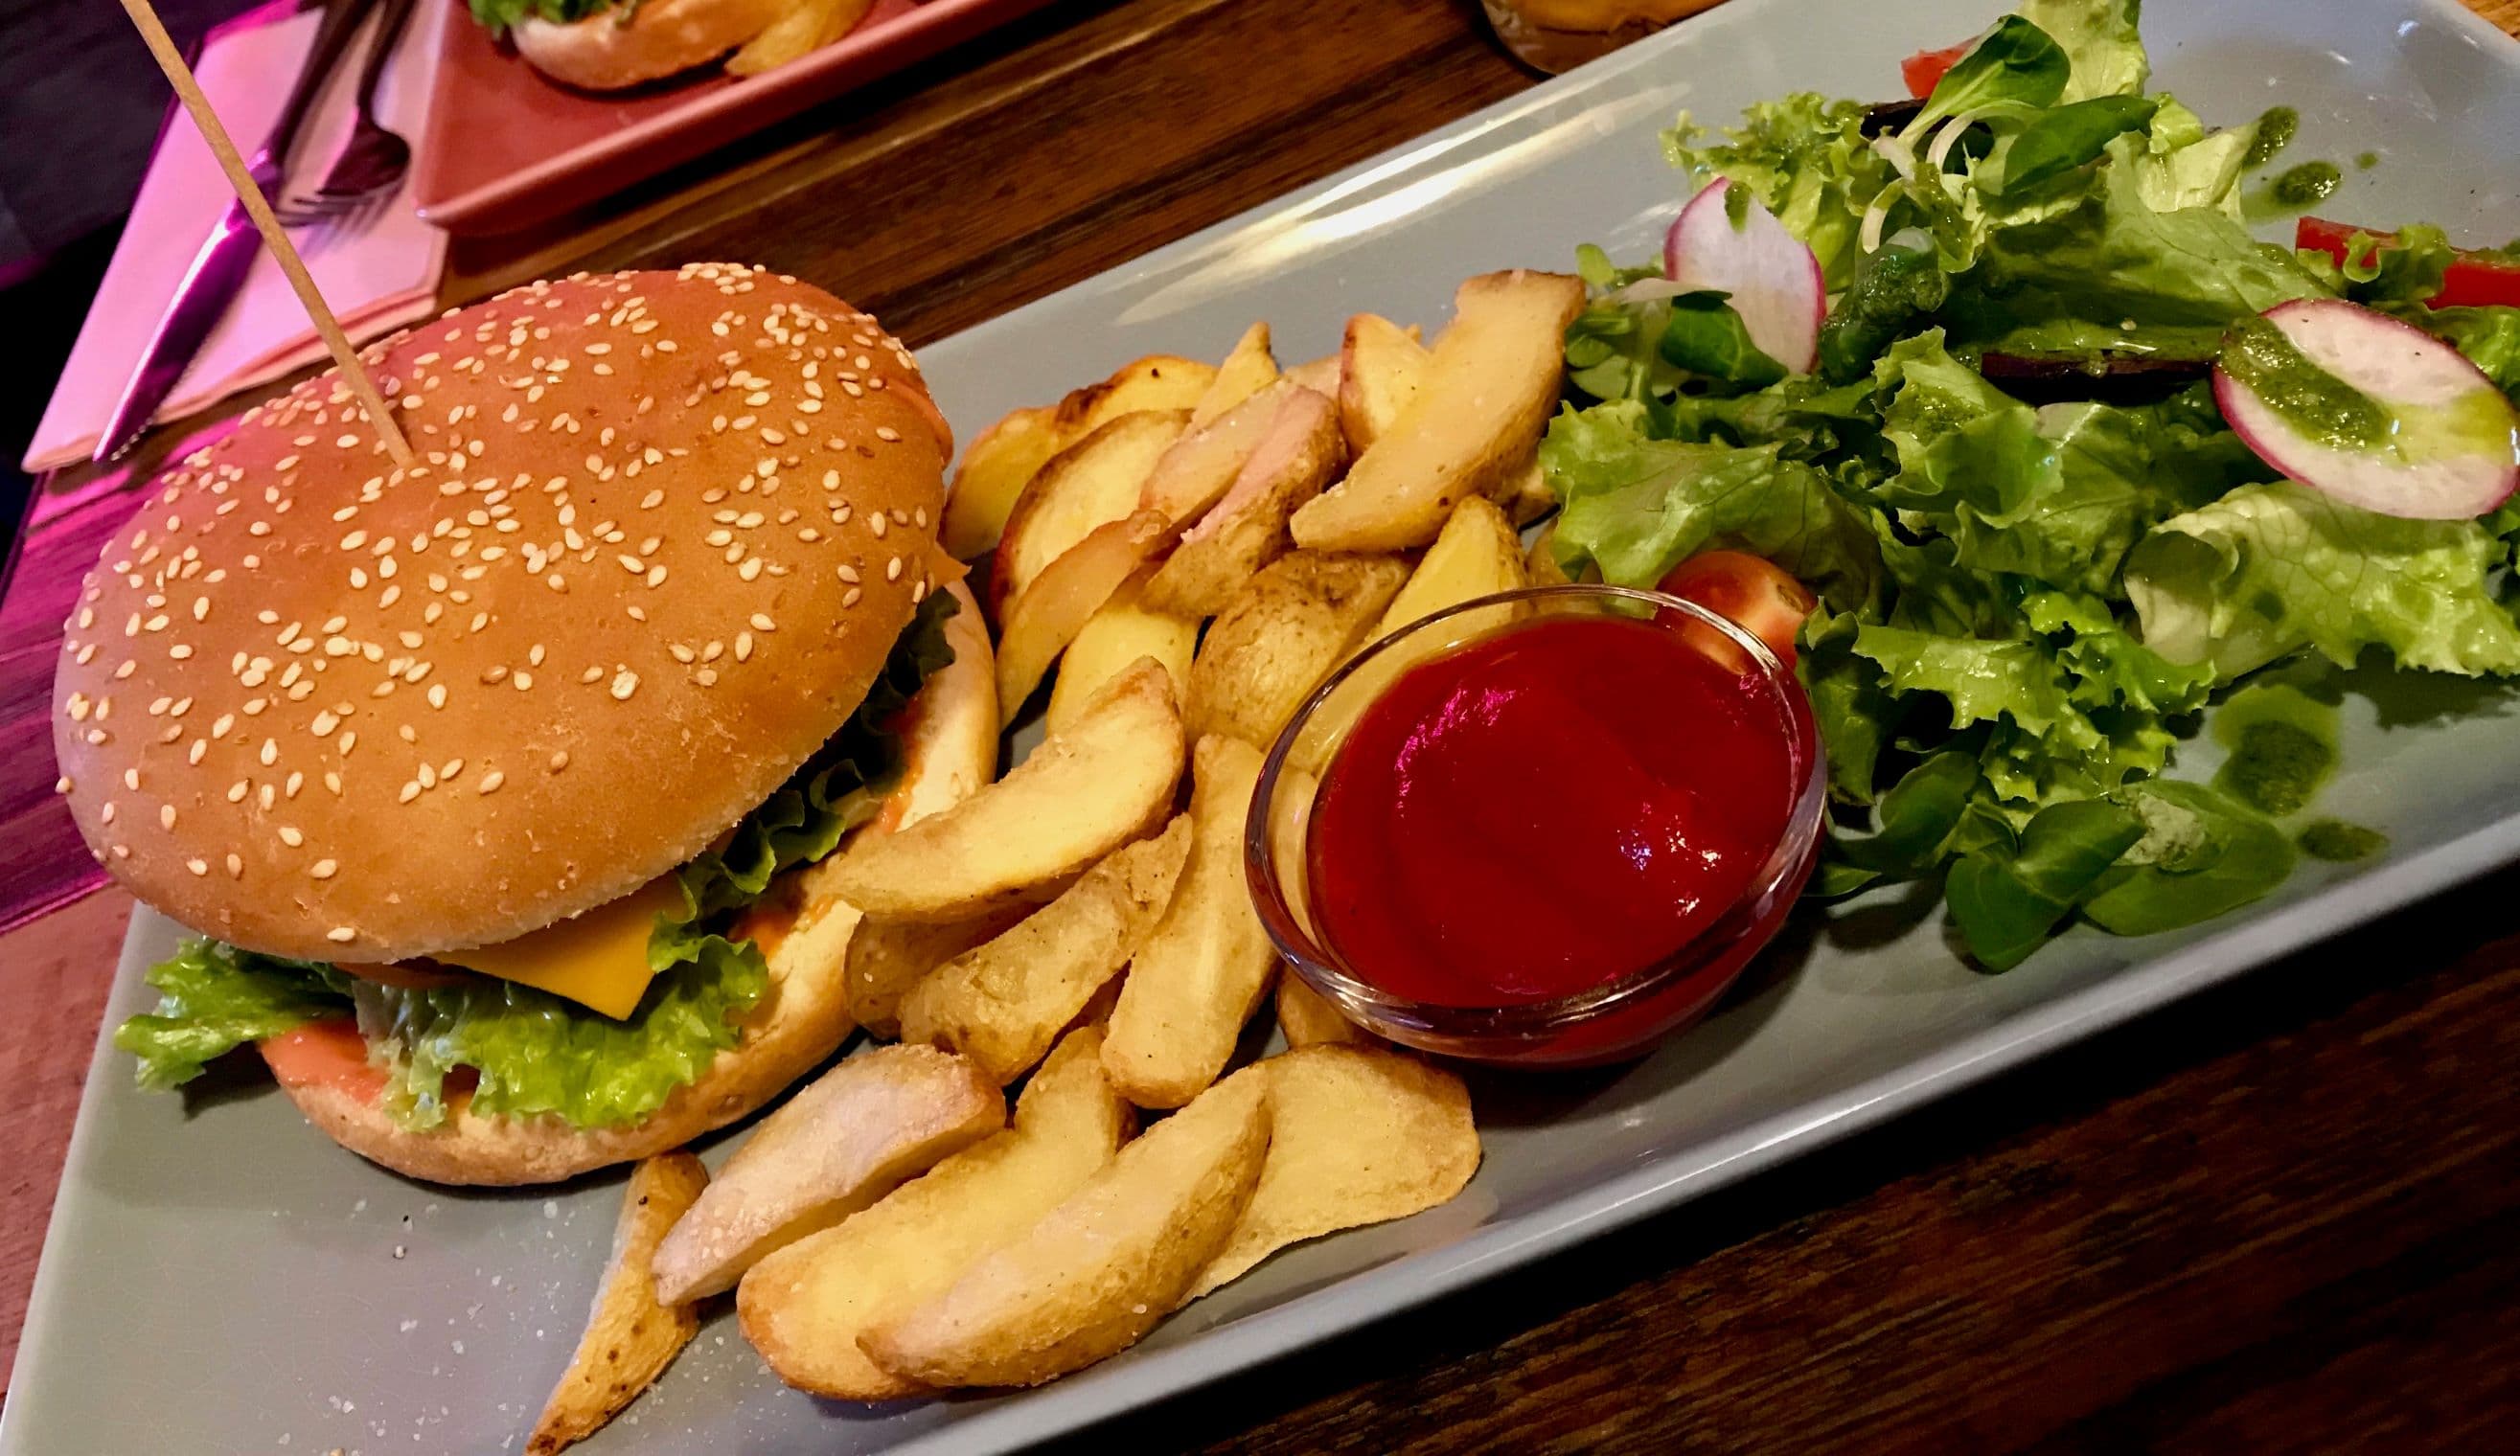 A vegan burger with fries and salad in Vilnius